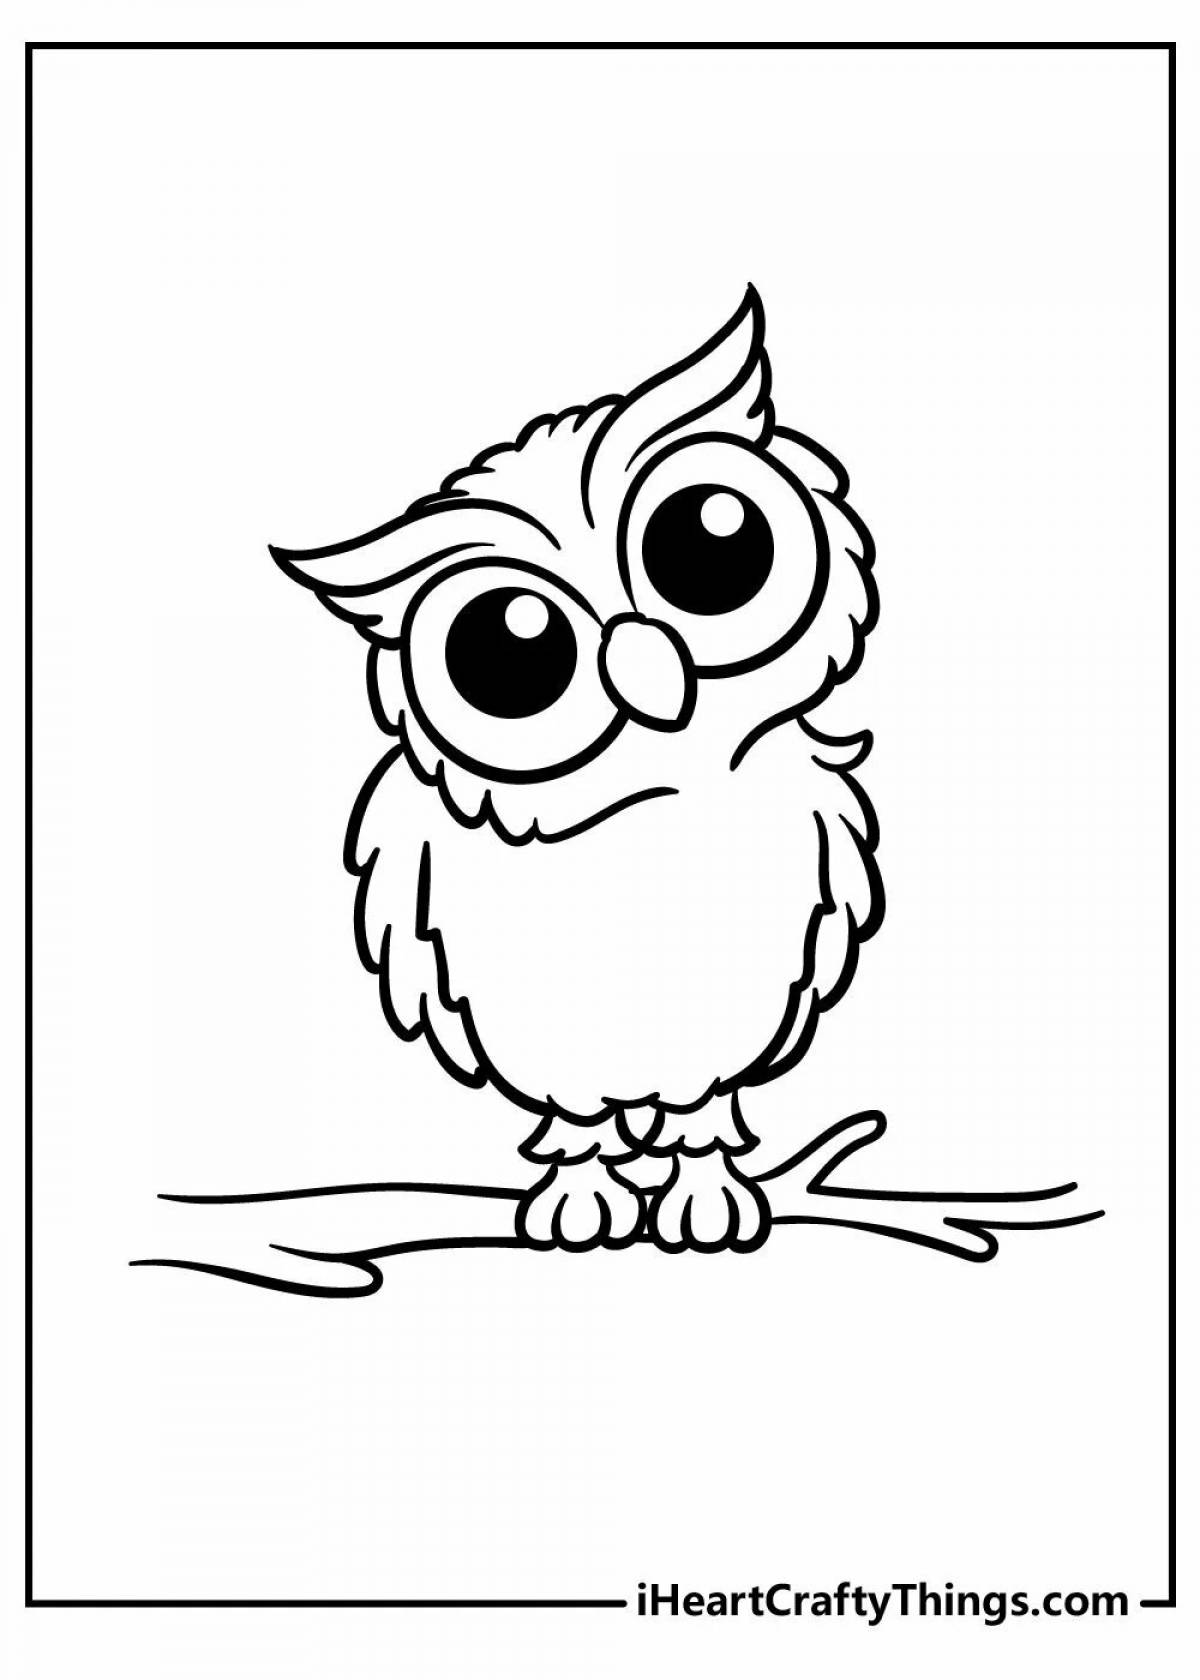 Witty cute owl coloring book